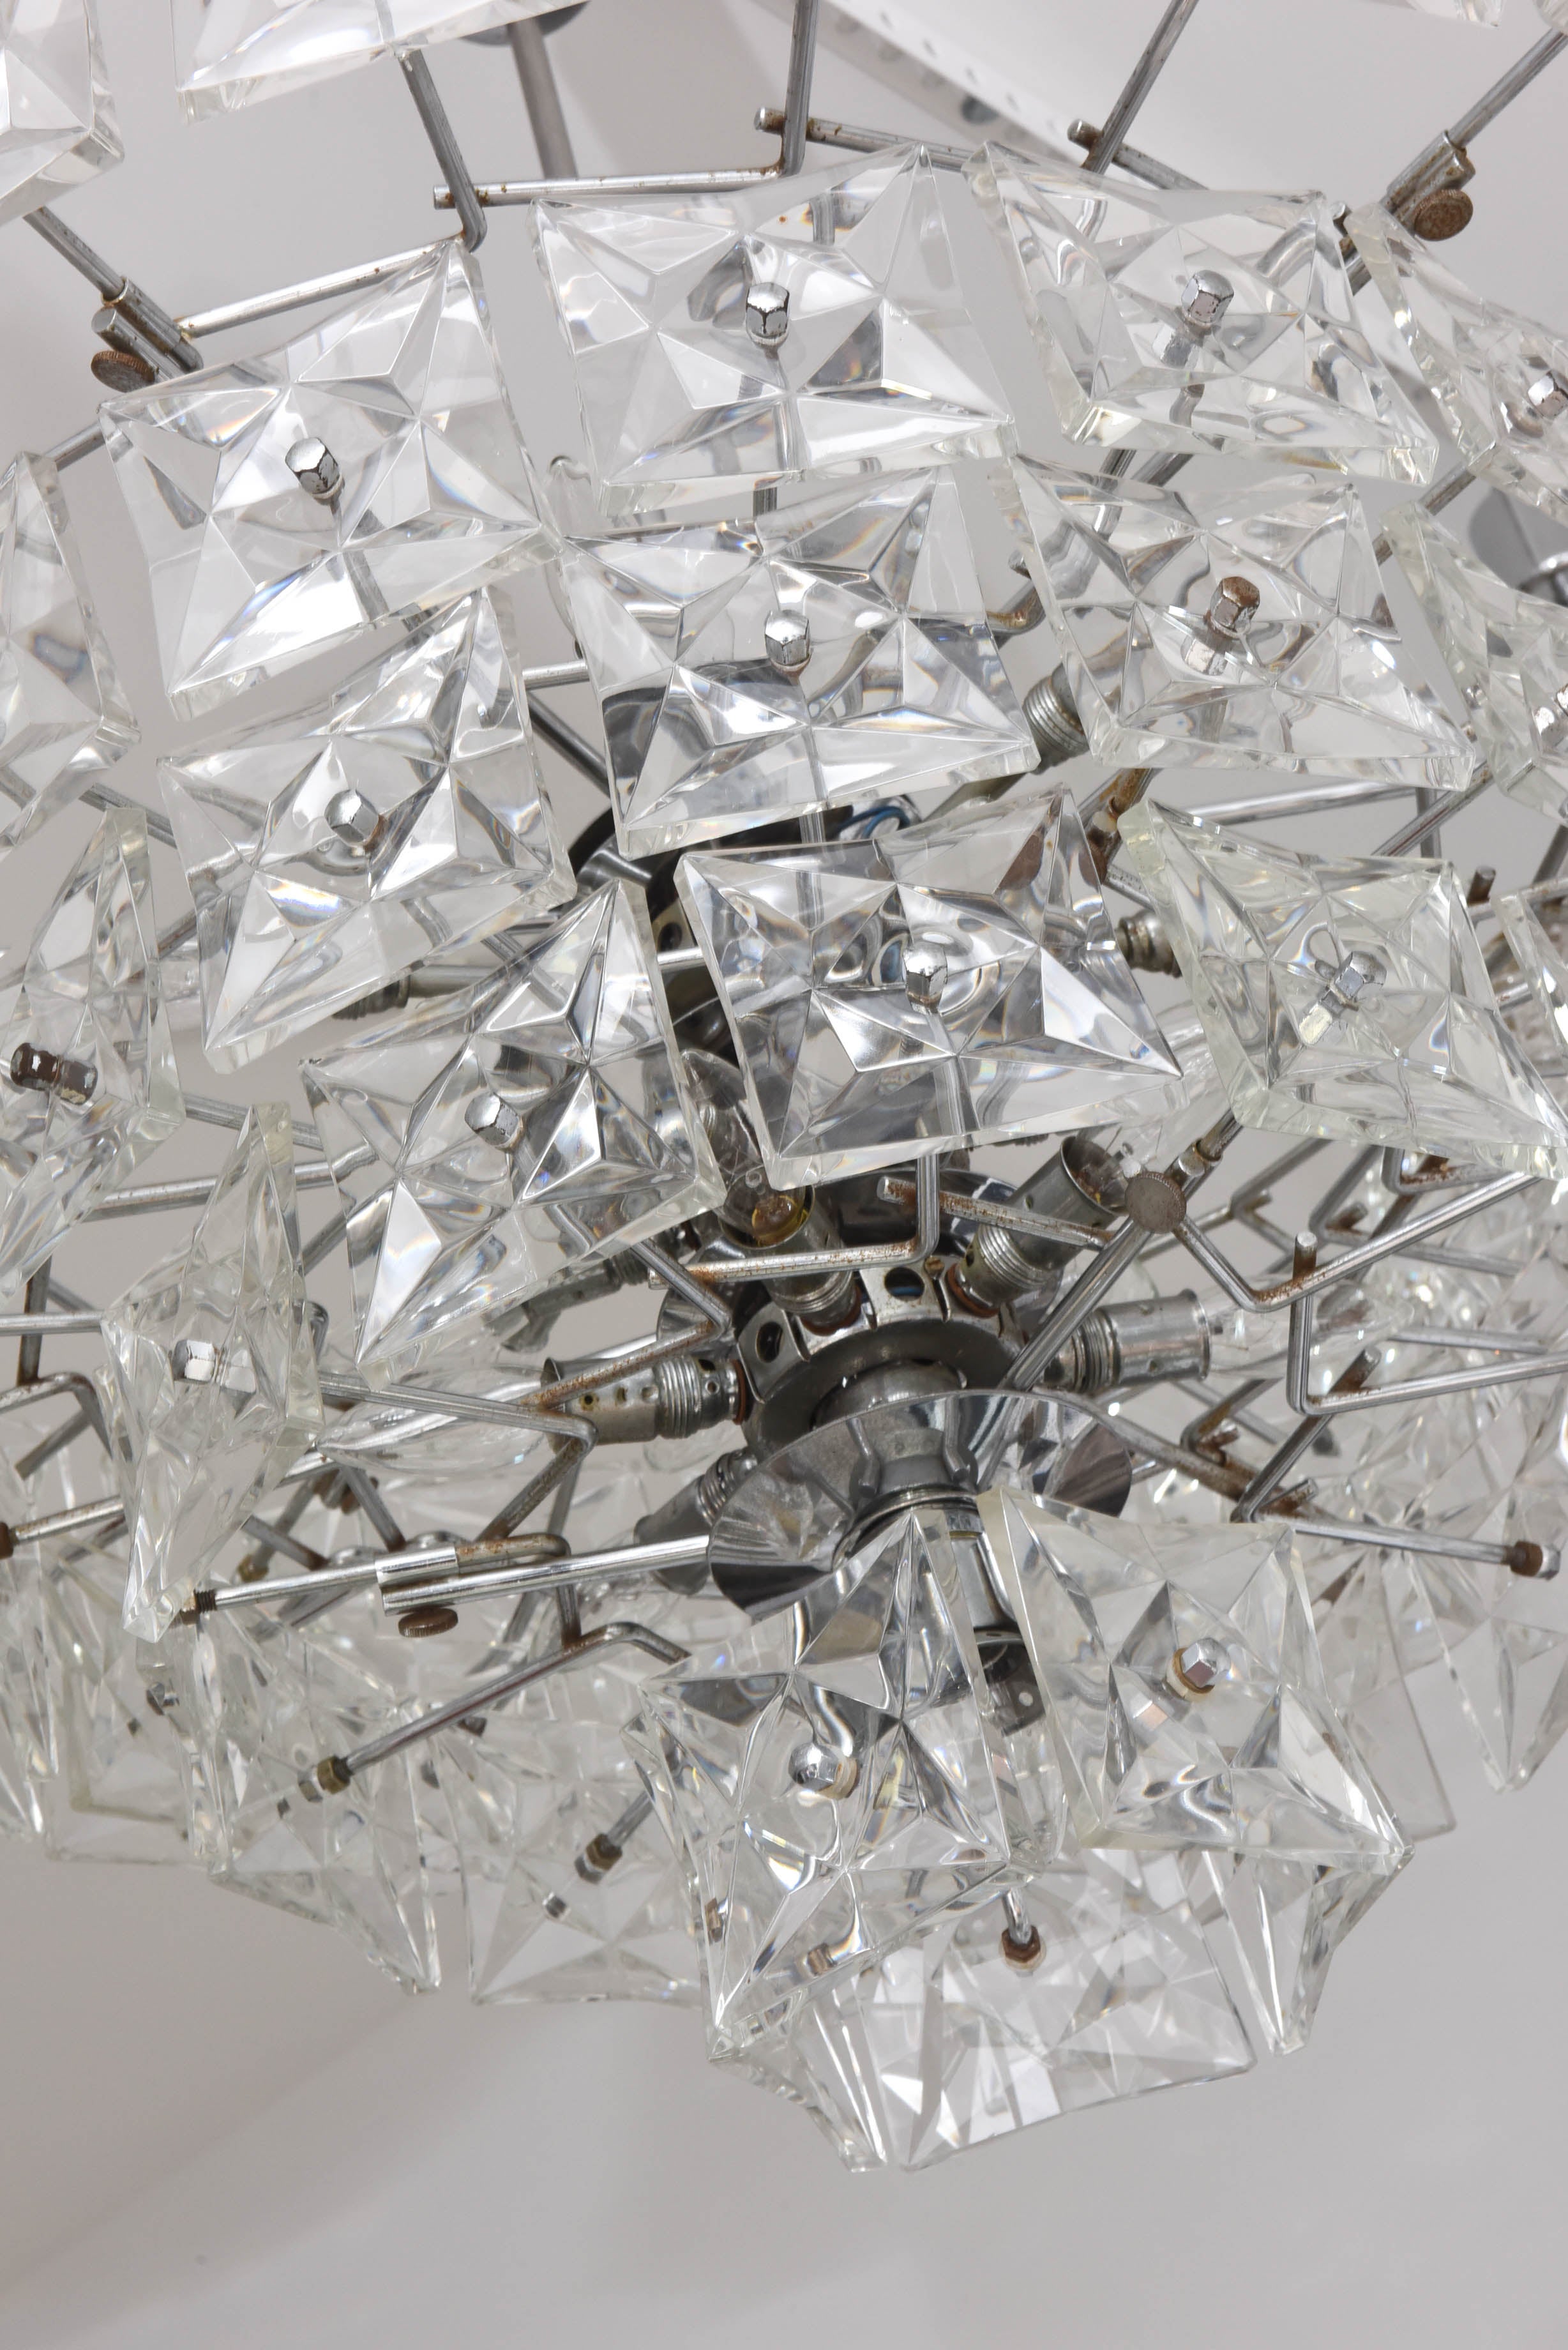 This Mid-Century Modern chandelier with its five-tiers of square-shaped crystals with faceted-stars was produced in the 1970s by the iconic firm Kinkeldey lighting based in Bad Pyrmont, Germany. 

The main body of the piece is 15" height x